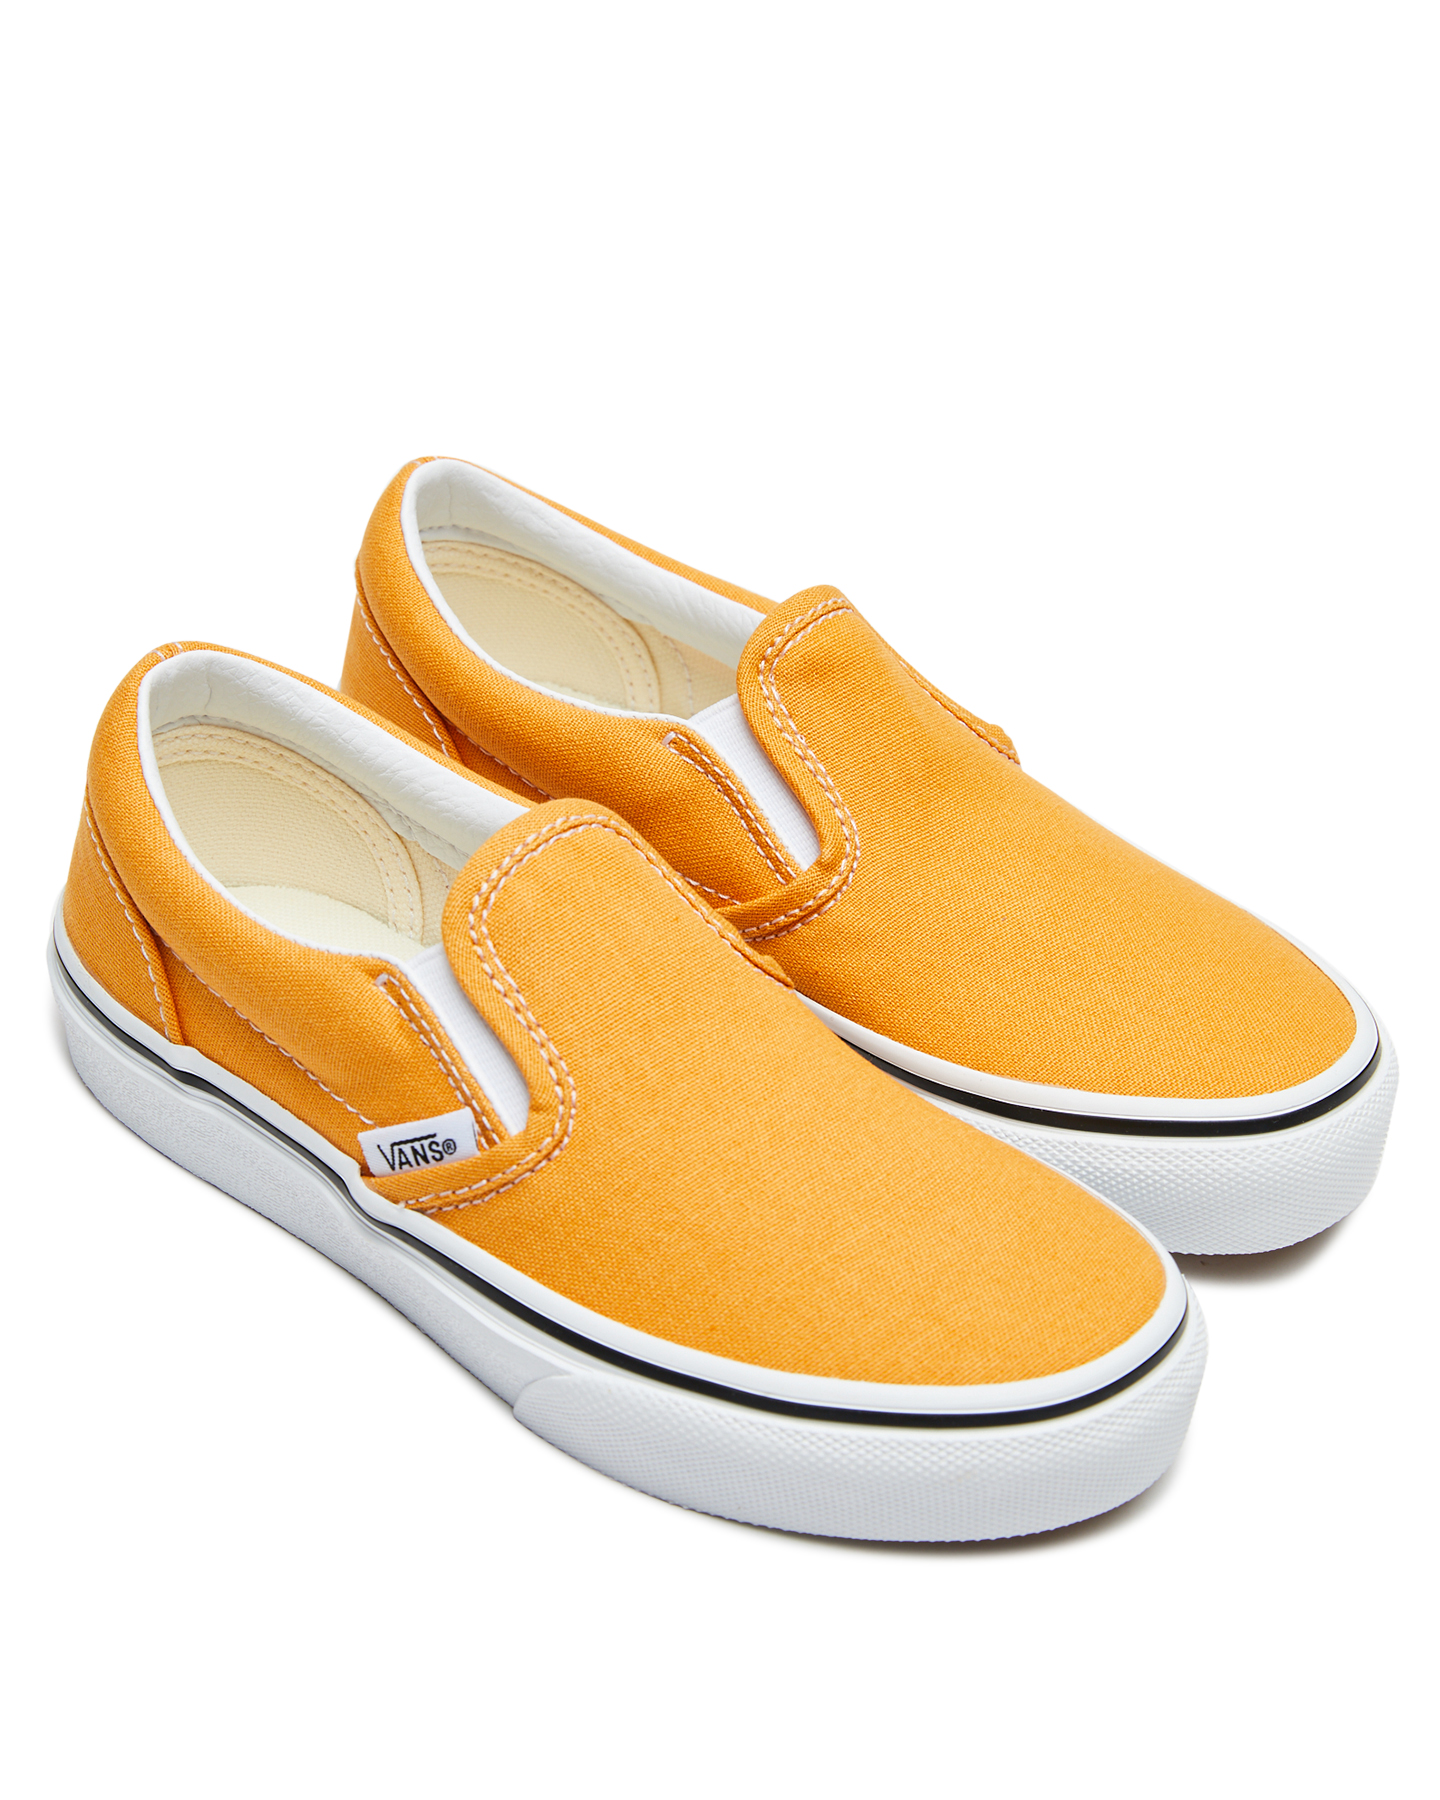 Vans Classic Slip-On Shoe - Youth - Golden Nugget | SurfStitch